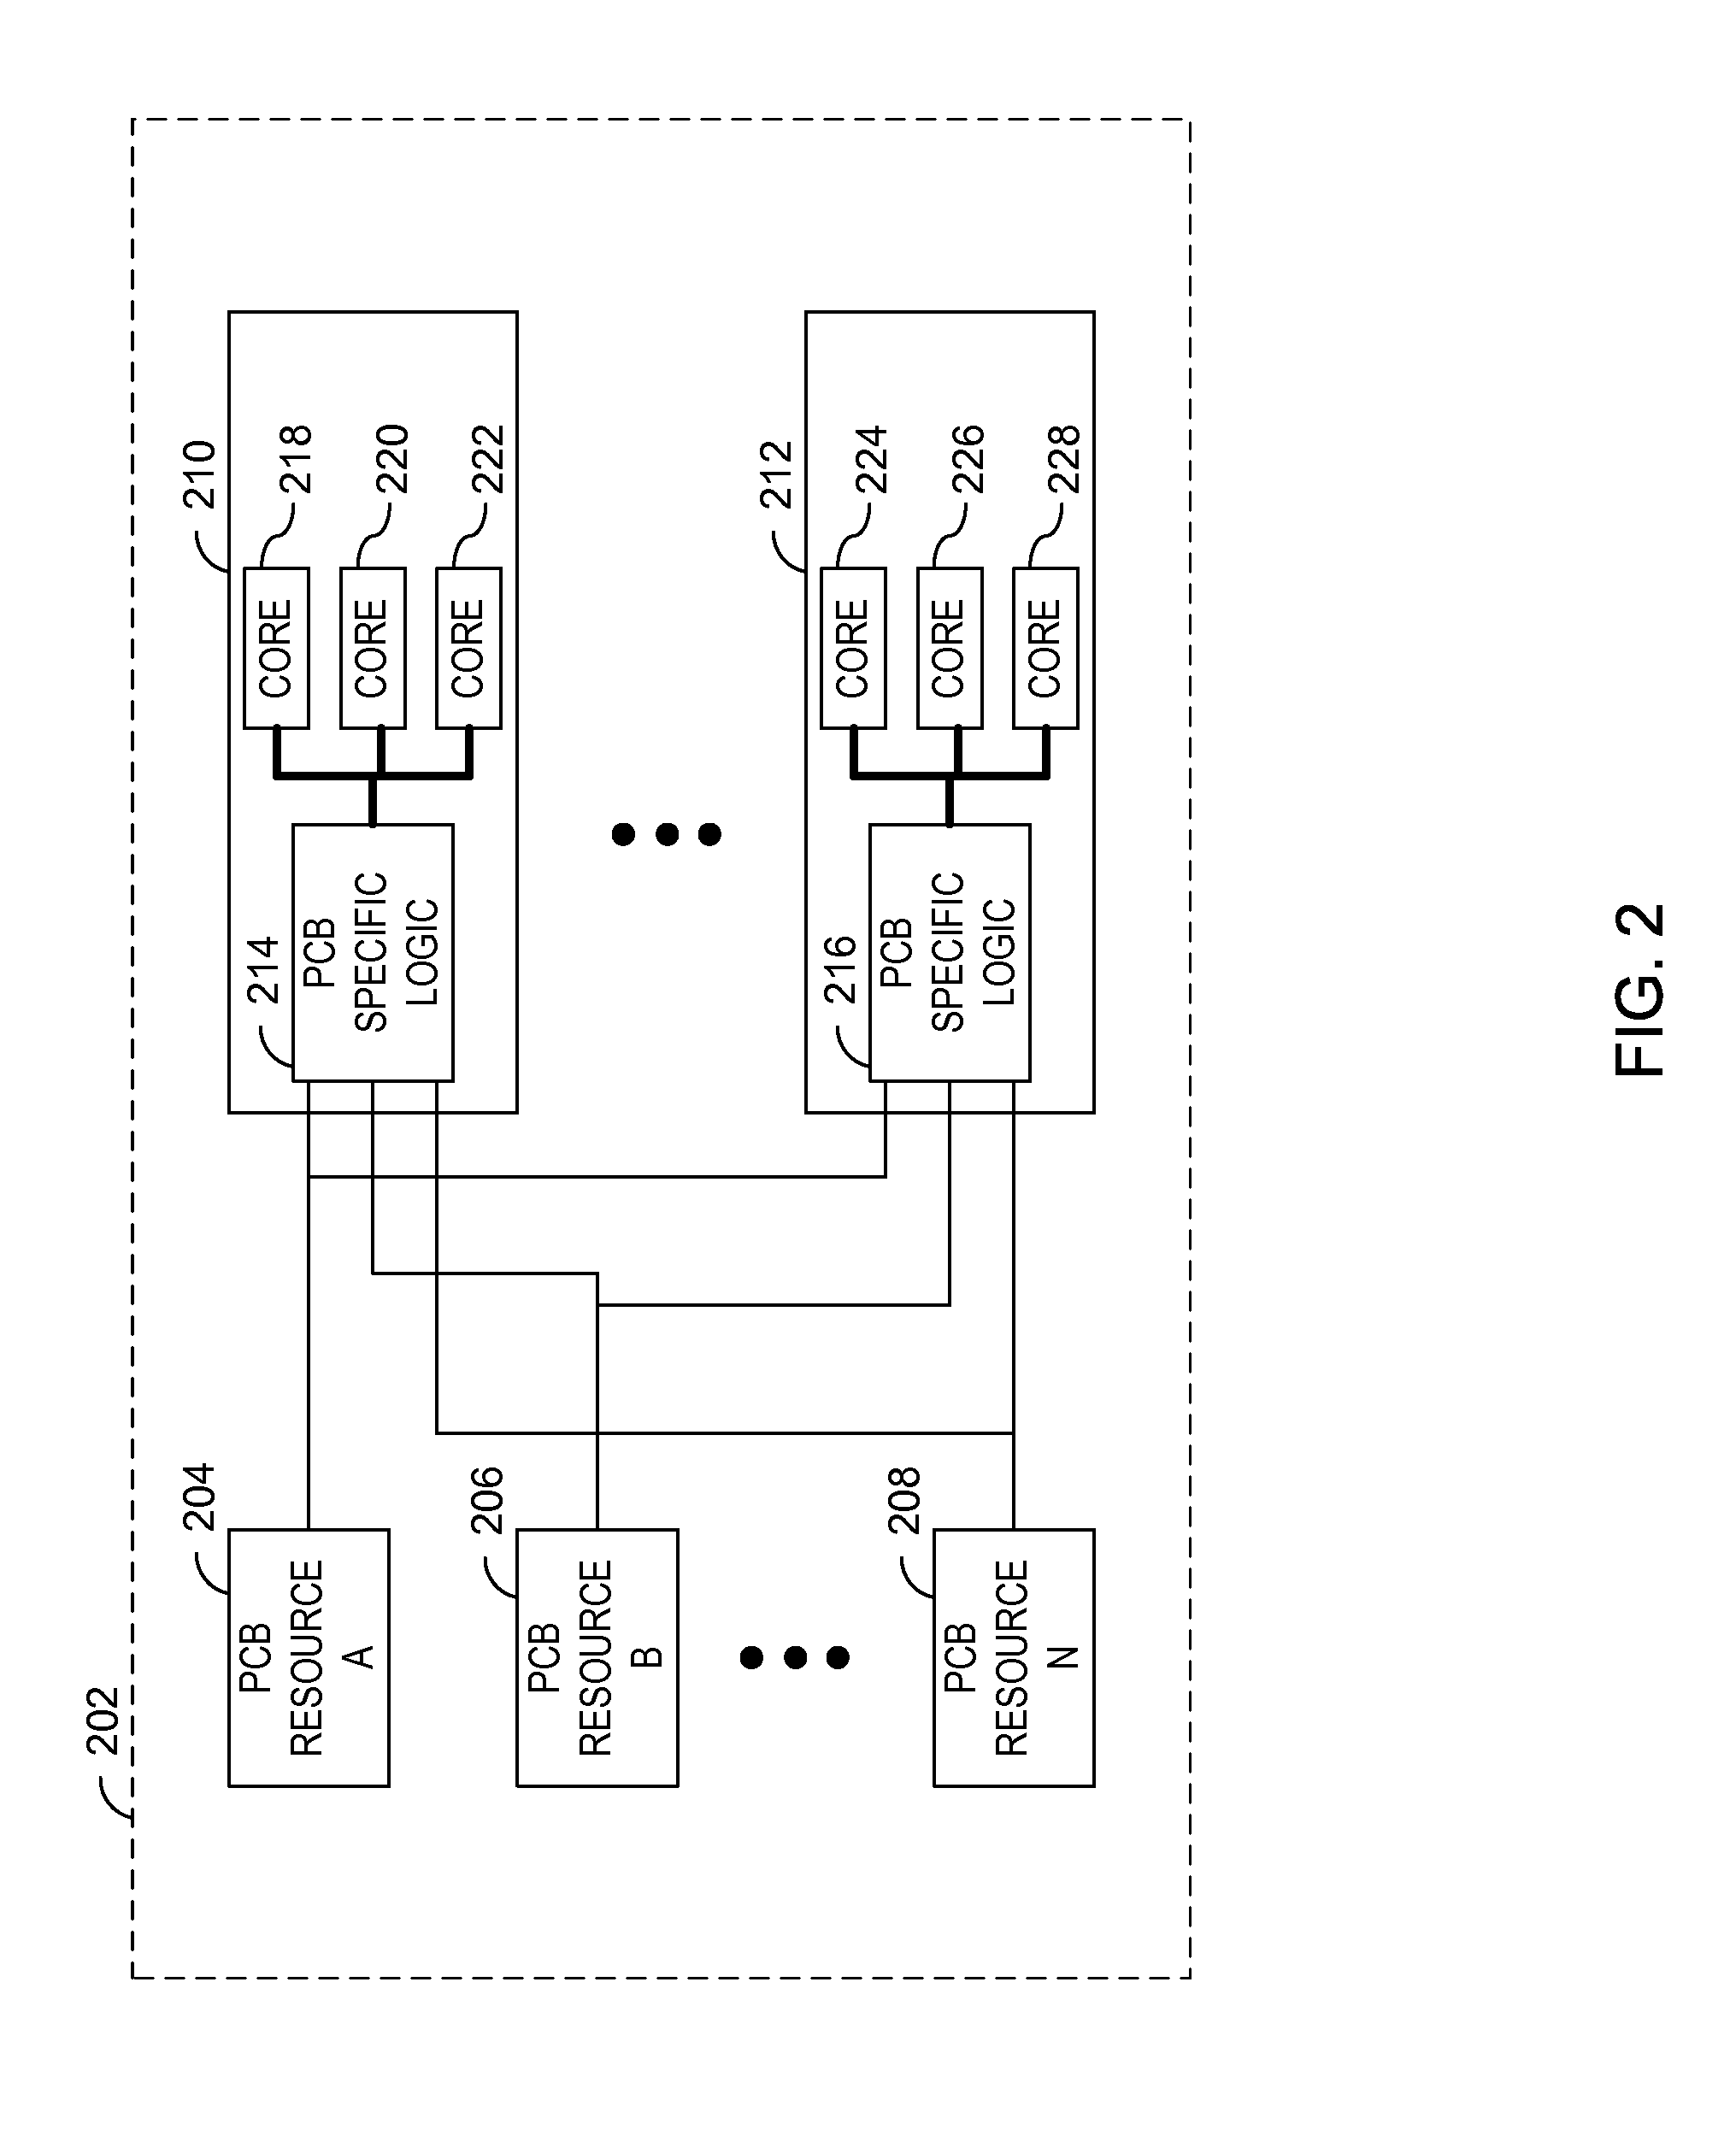 Method of automating clock signal provisioning within an integrated circuit